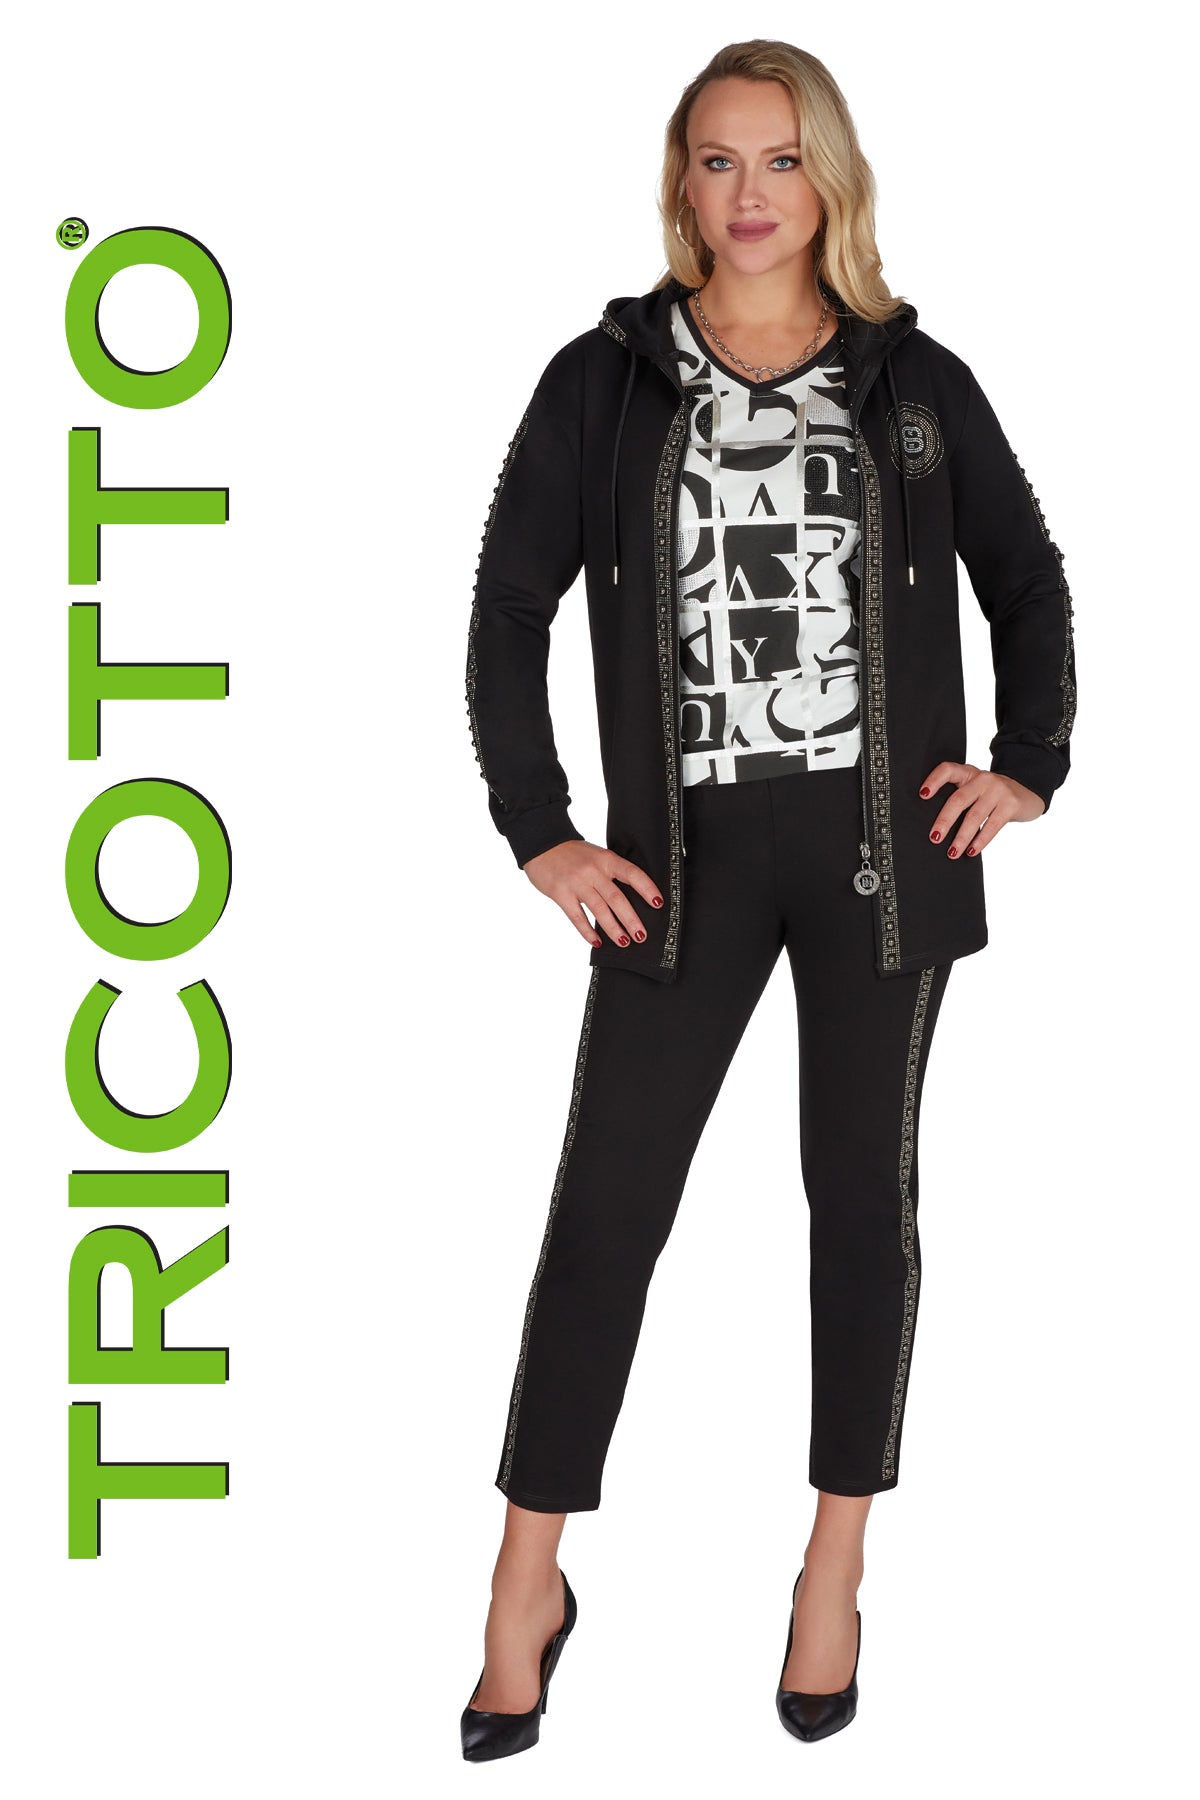 Tricotto Jeans-Tricotto Pants-Tricotto Black Pants-Tricotto Clothing Montreal